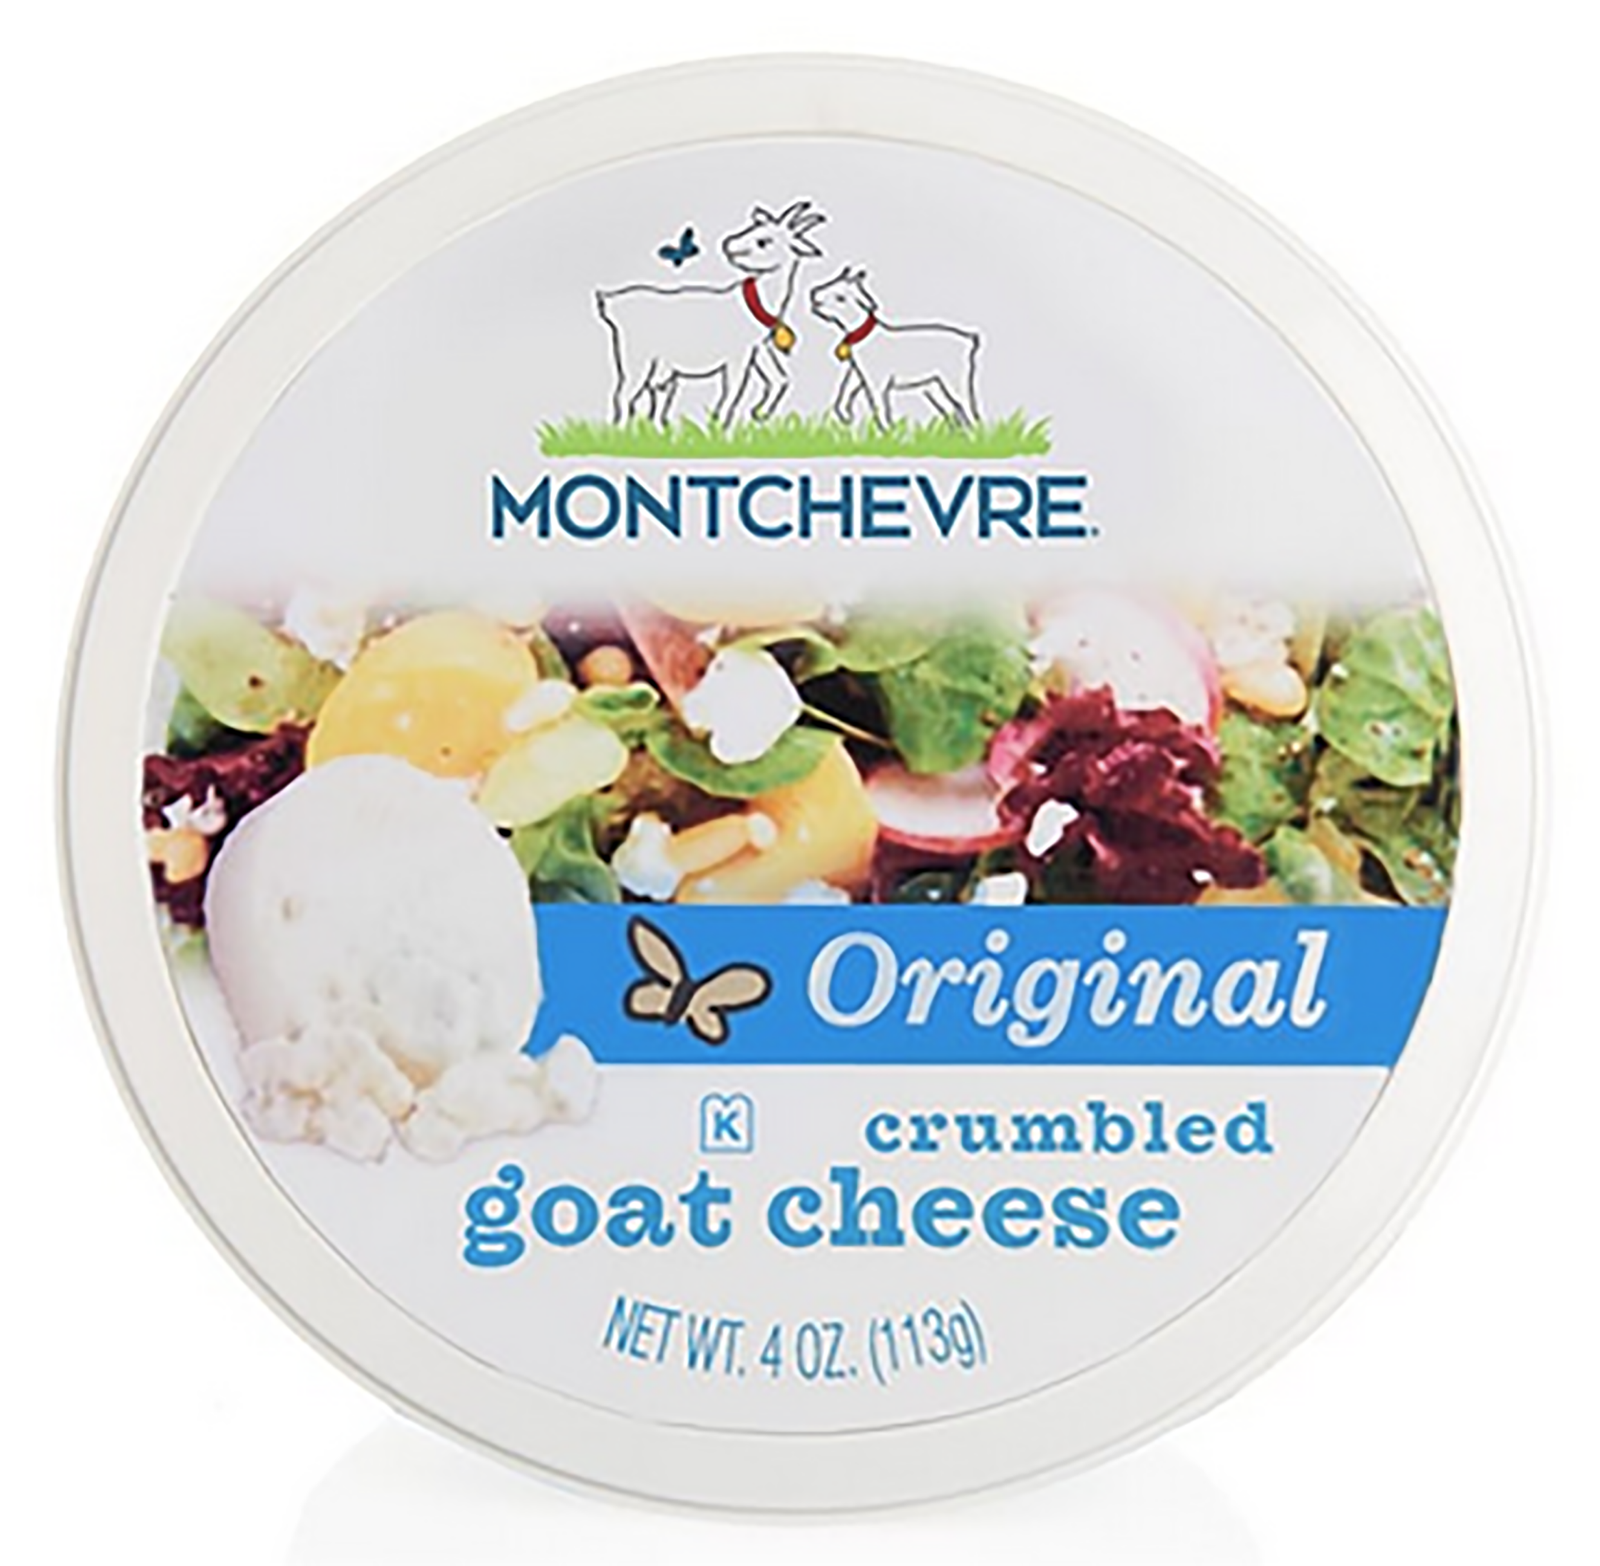 Montchevre Crumbled Goat Cheese Cup 4 oz (PACKS OF 12) - $69.29